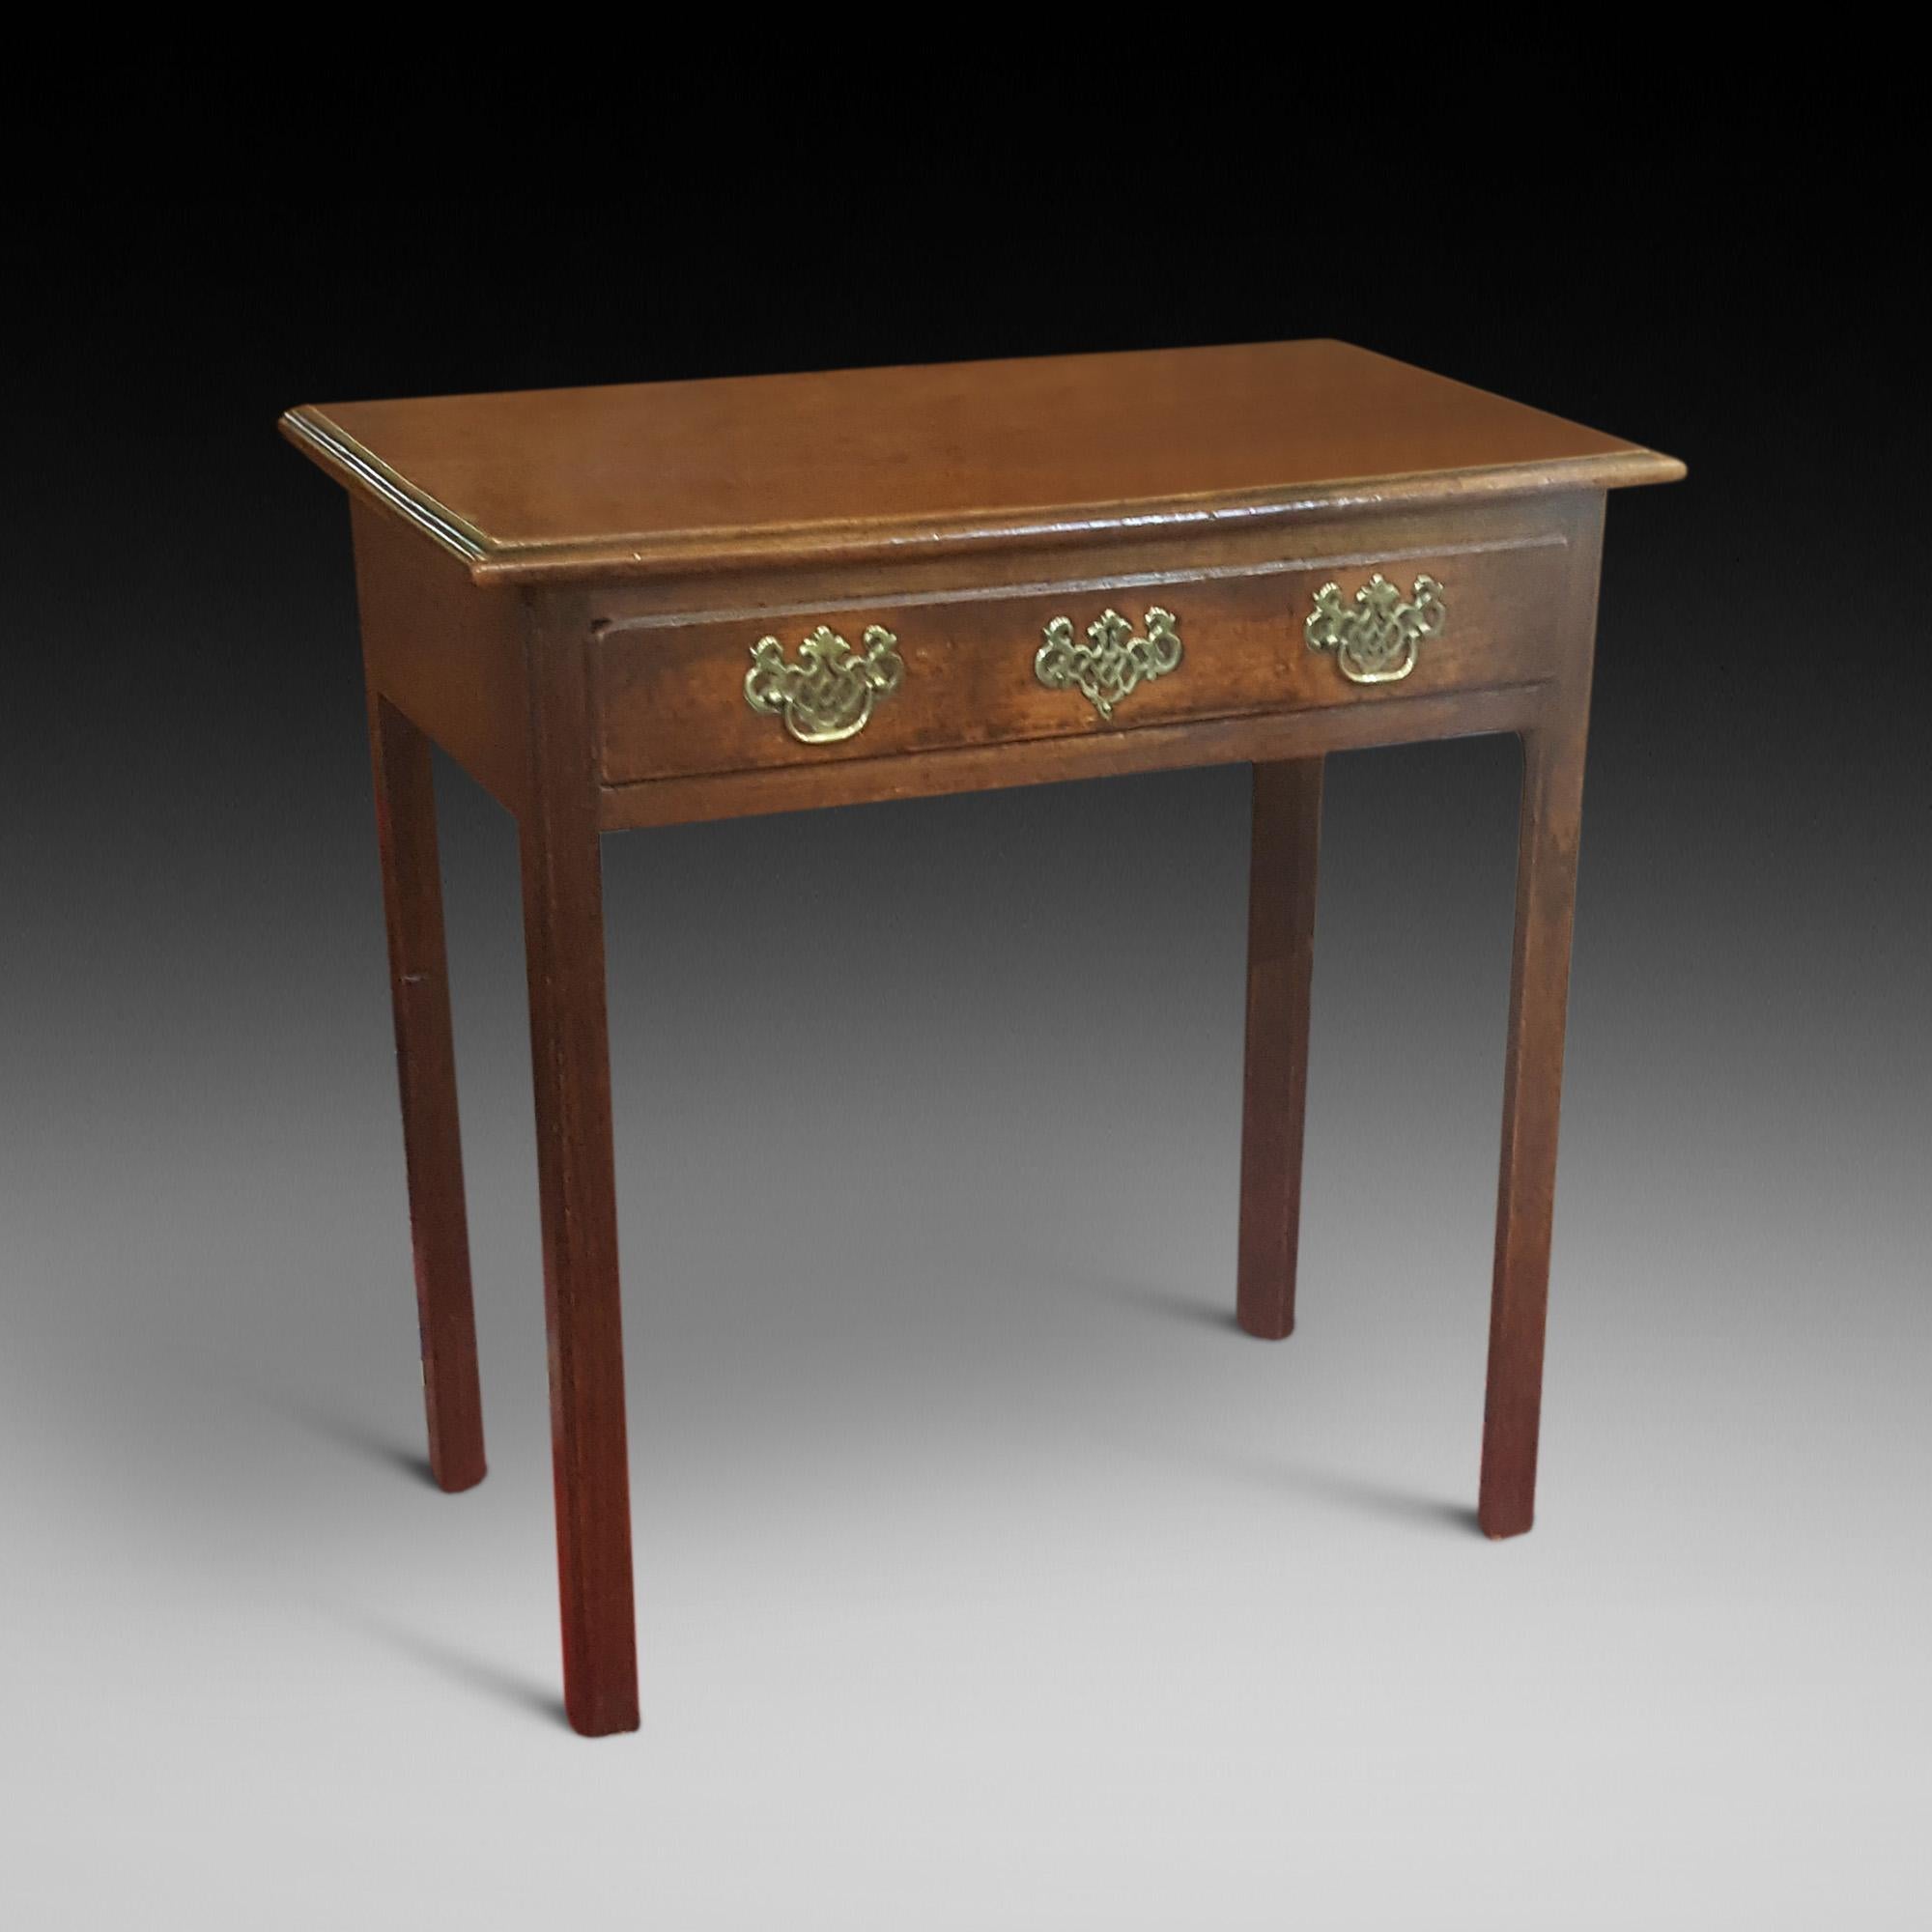 Country oak lowboy with square champhered leg and single drawer, early 18th century, measures: 28